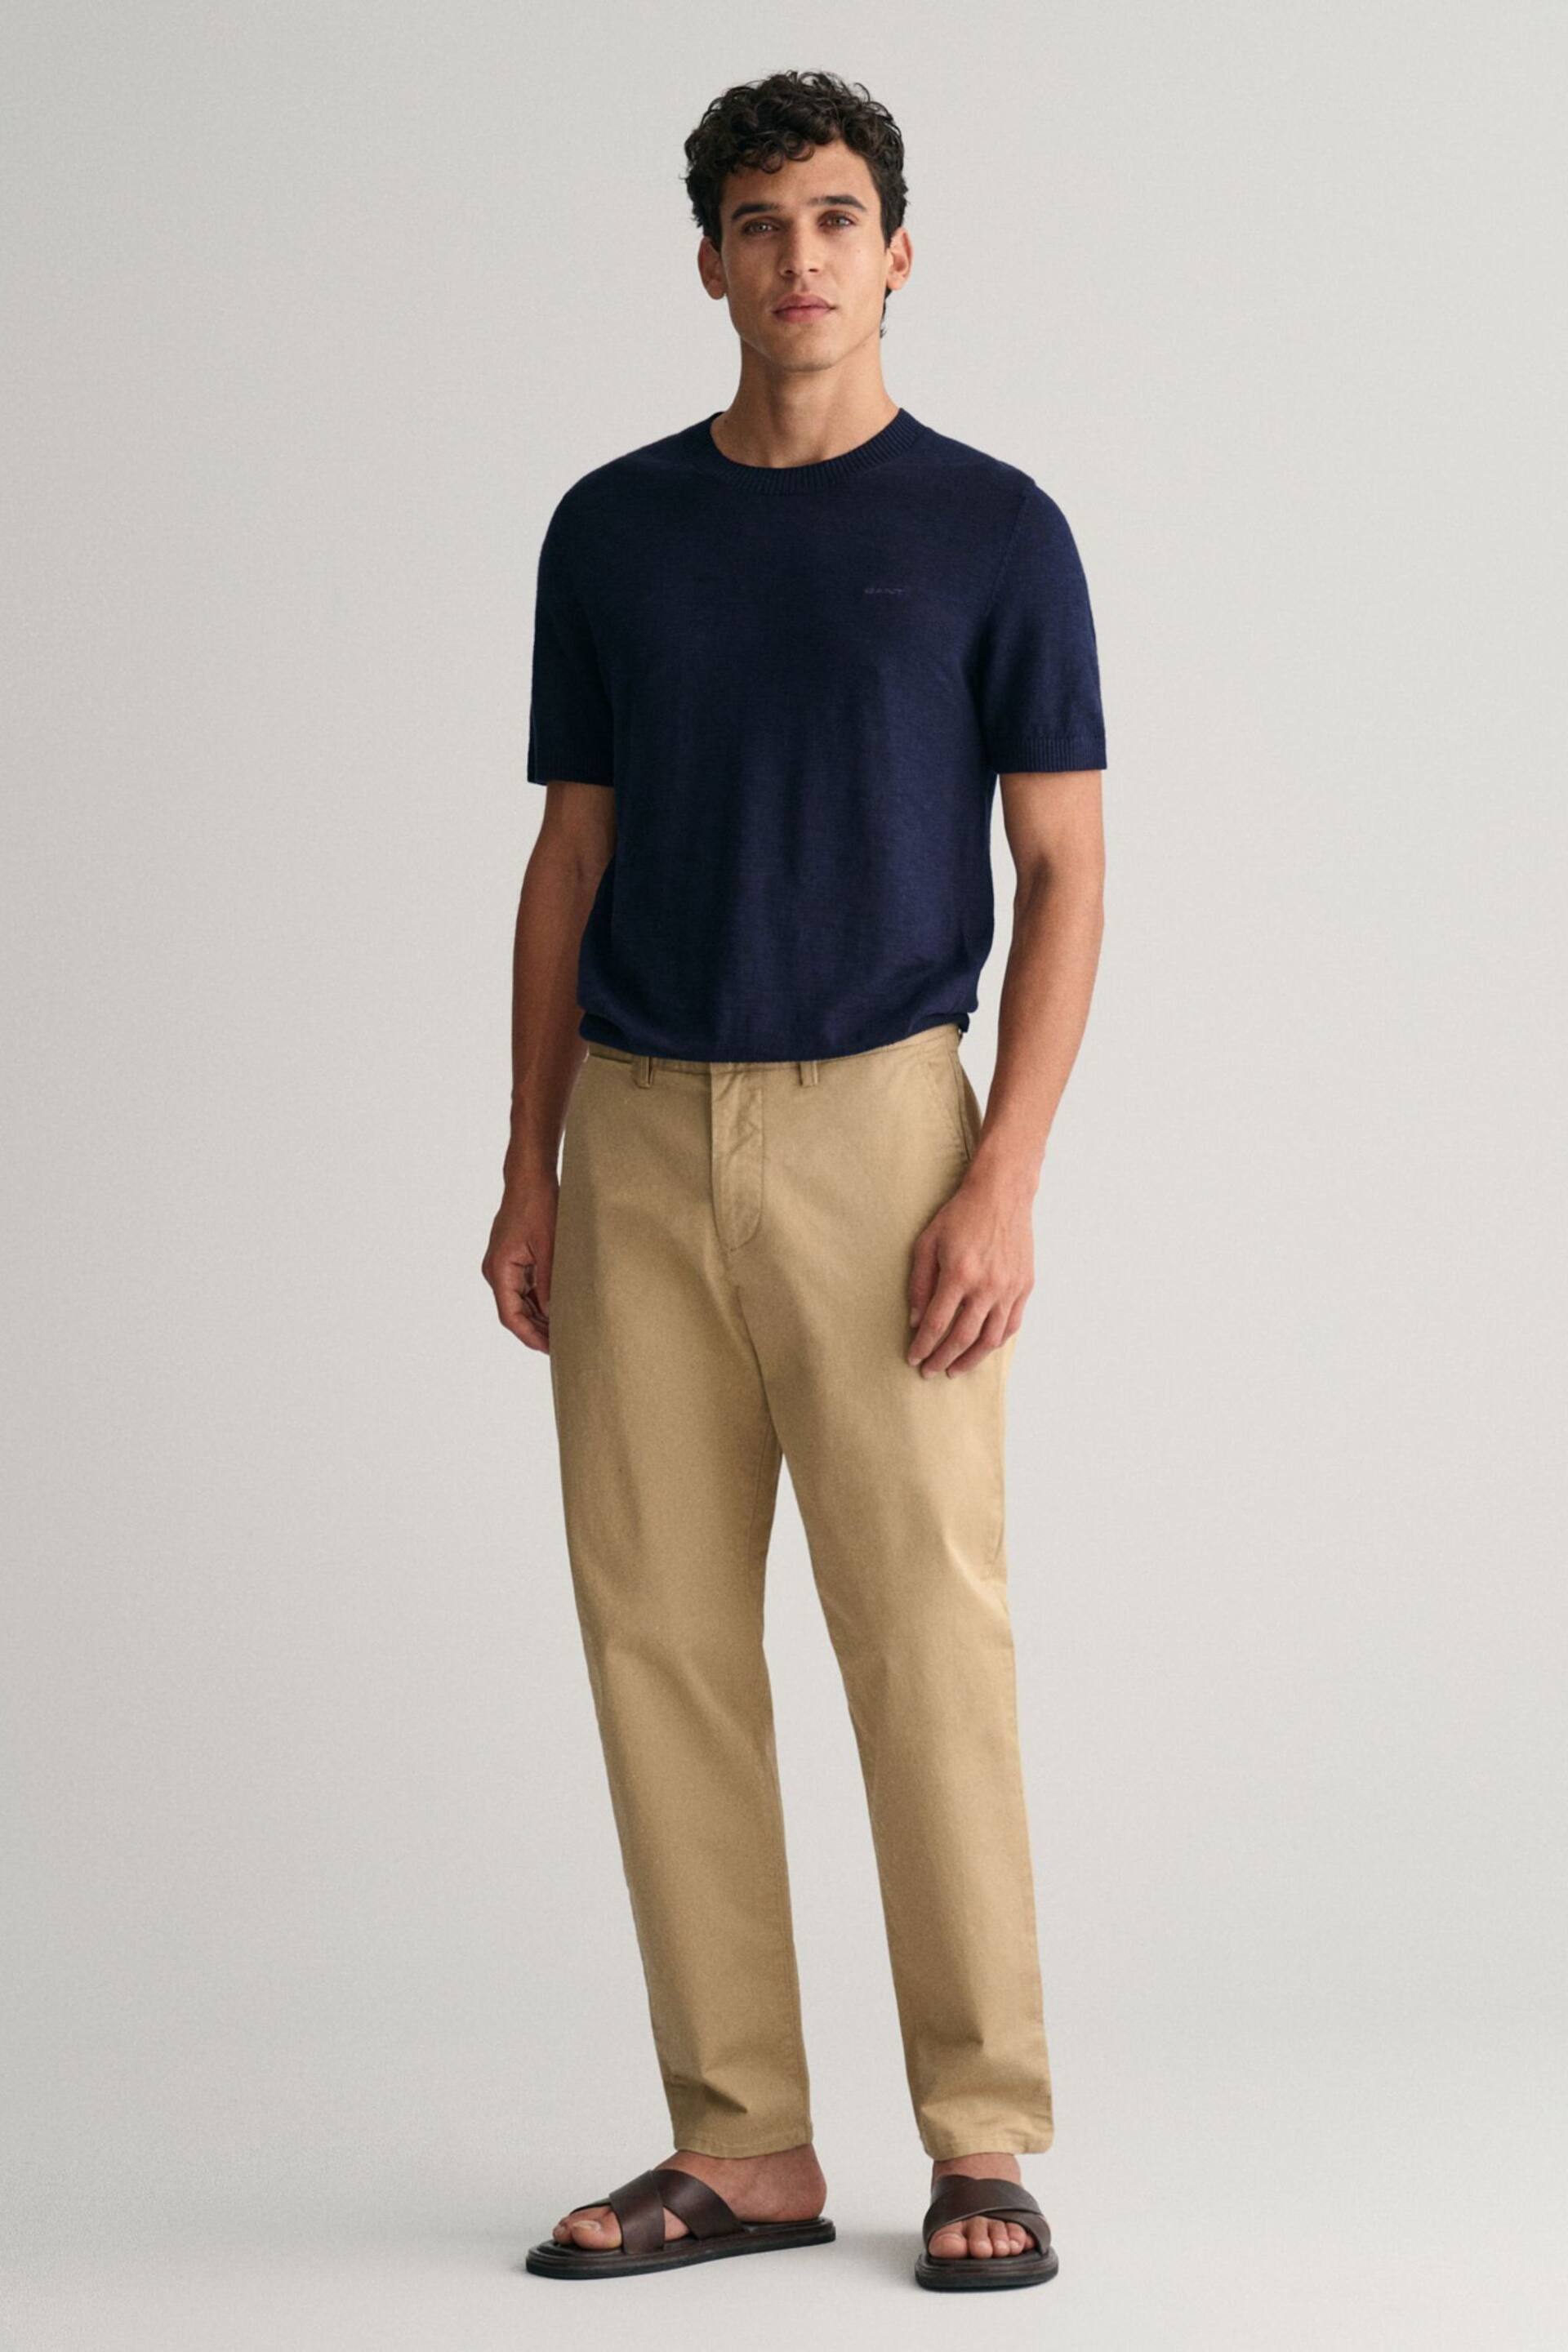 GANT Knitted Cotton Linen T-Shirt - Image 3 of 5